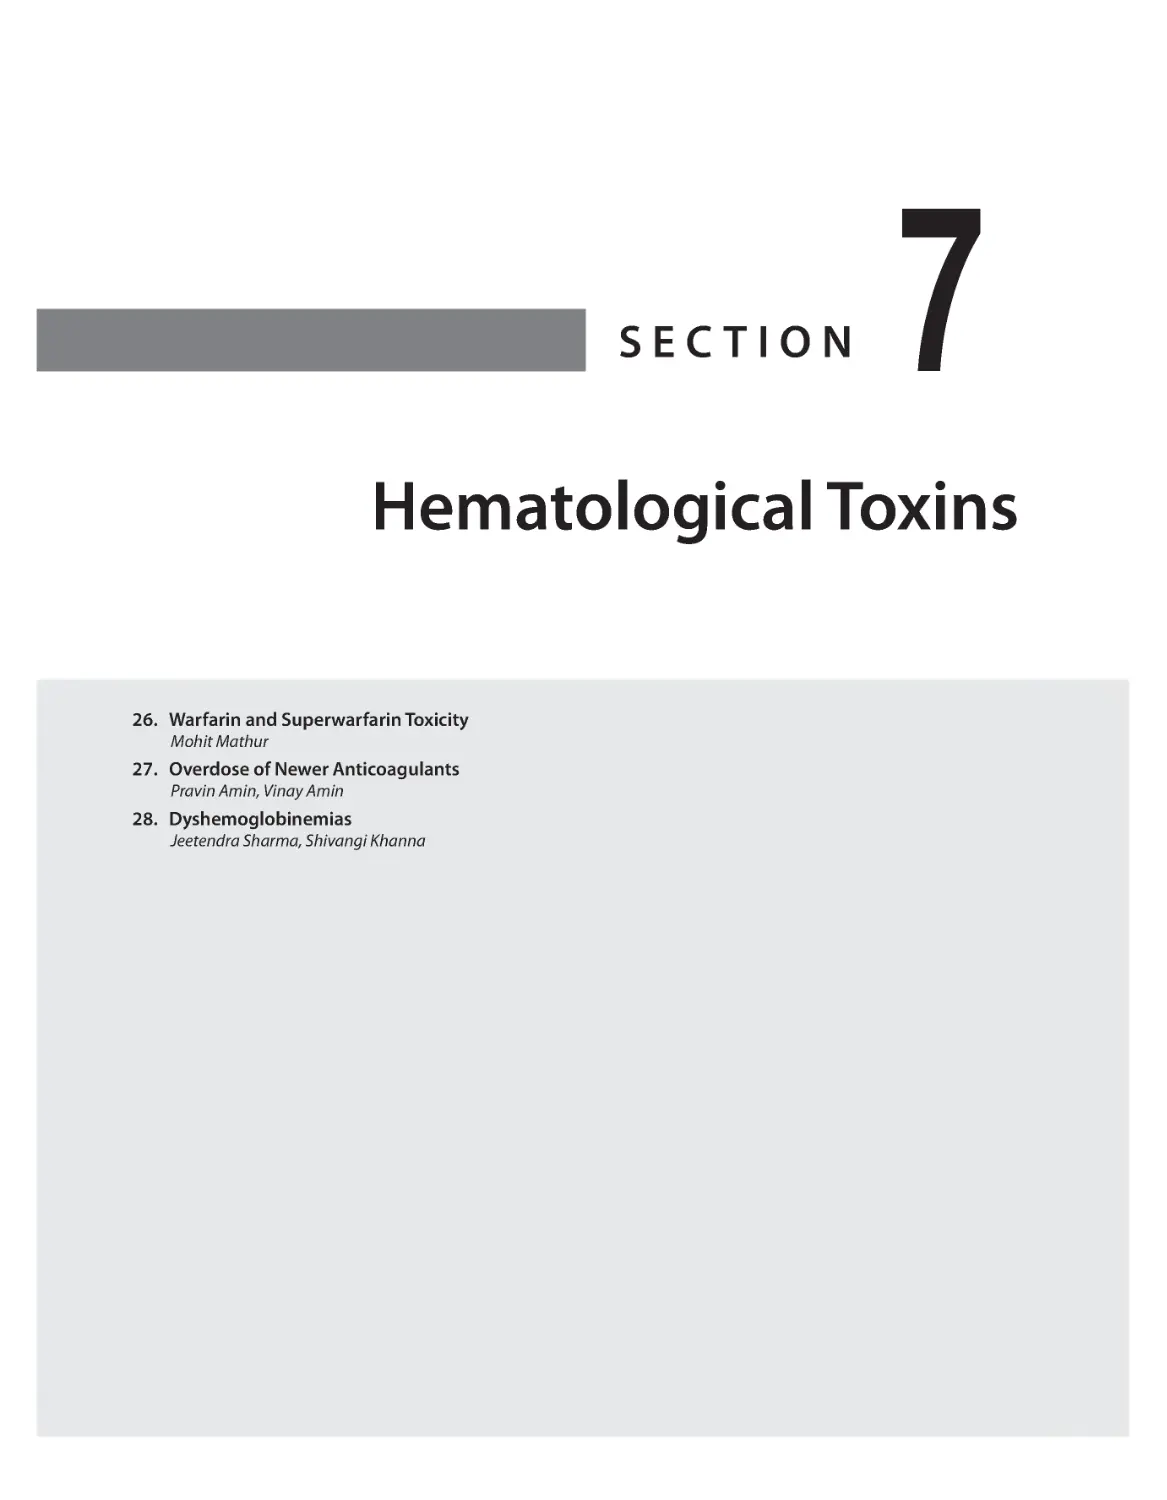 SECTION 7: Hematological Toxins